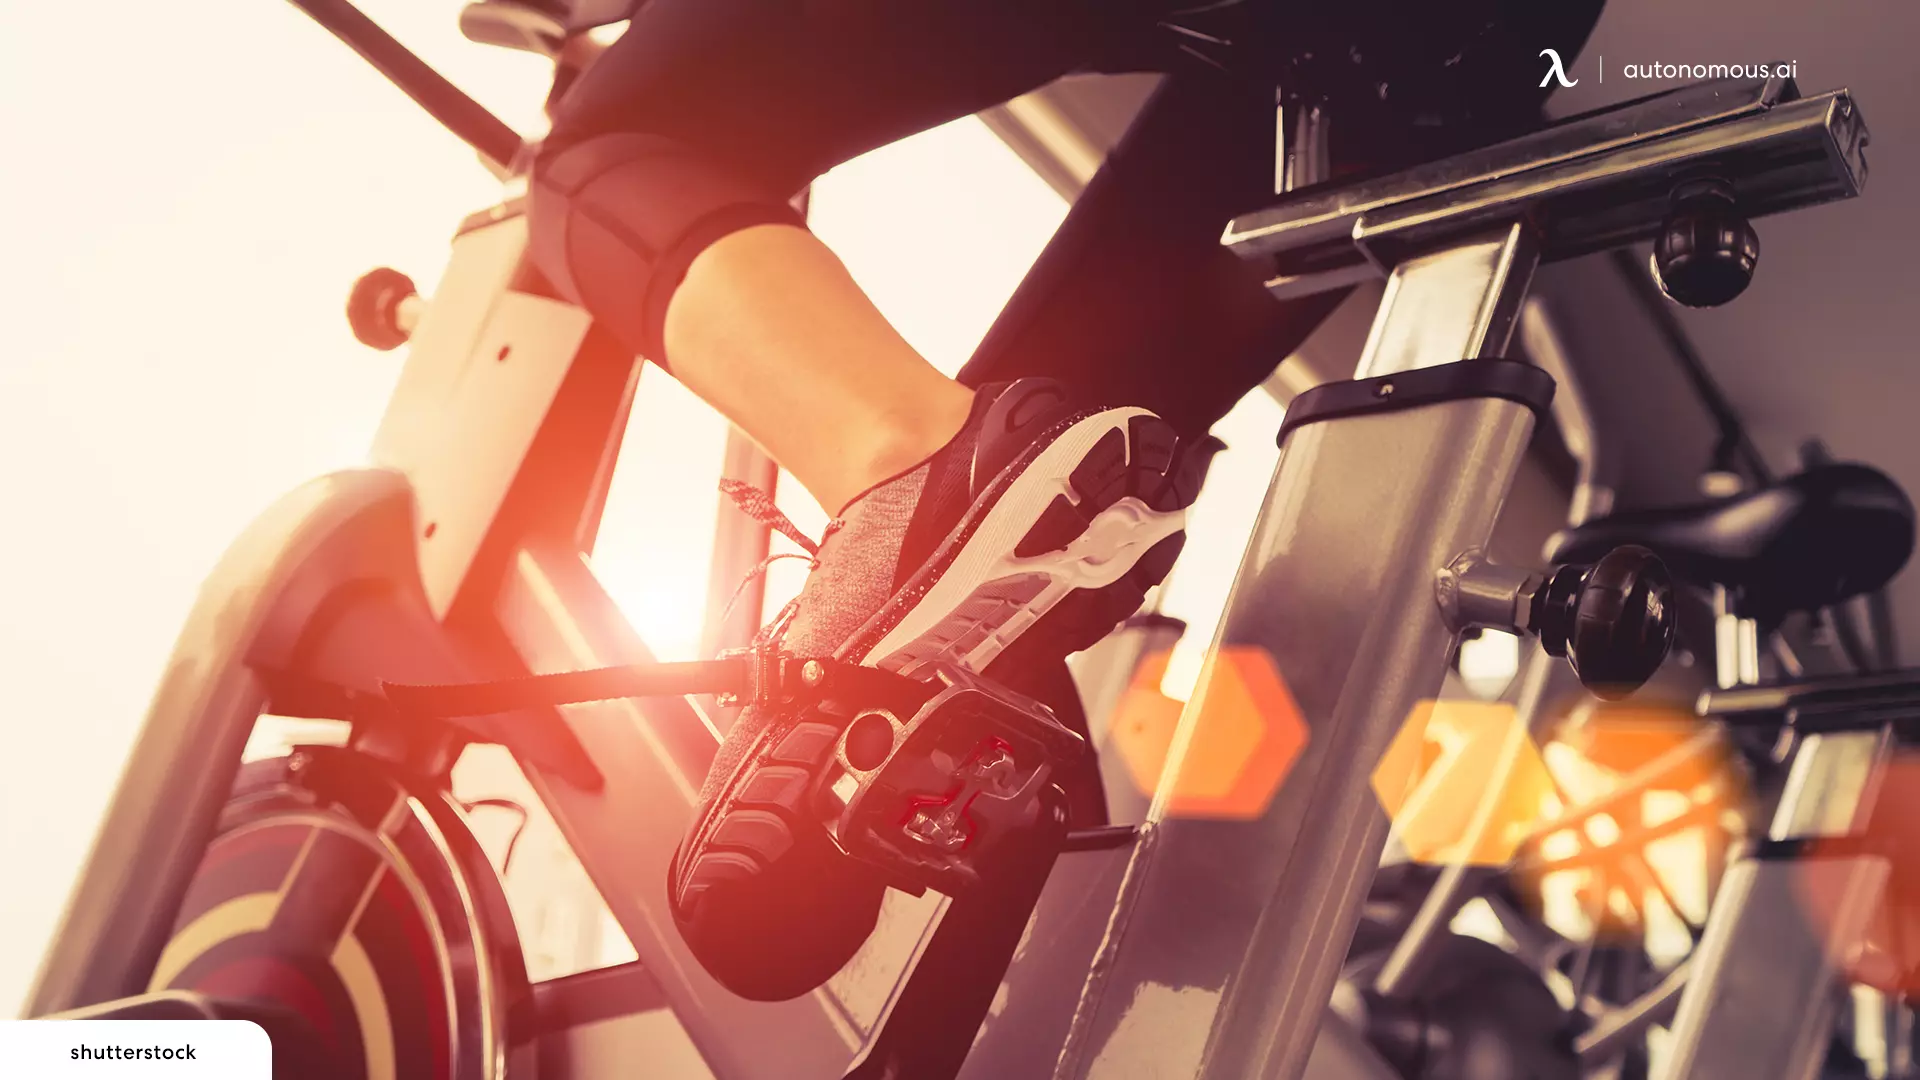 What Are the Benefits of a Stationary Bike Workout?